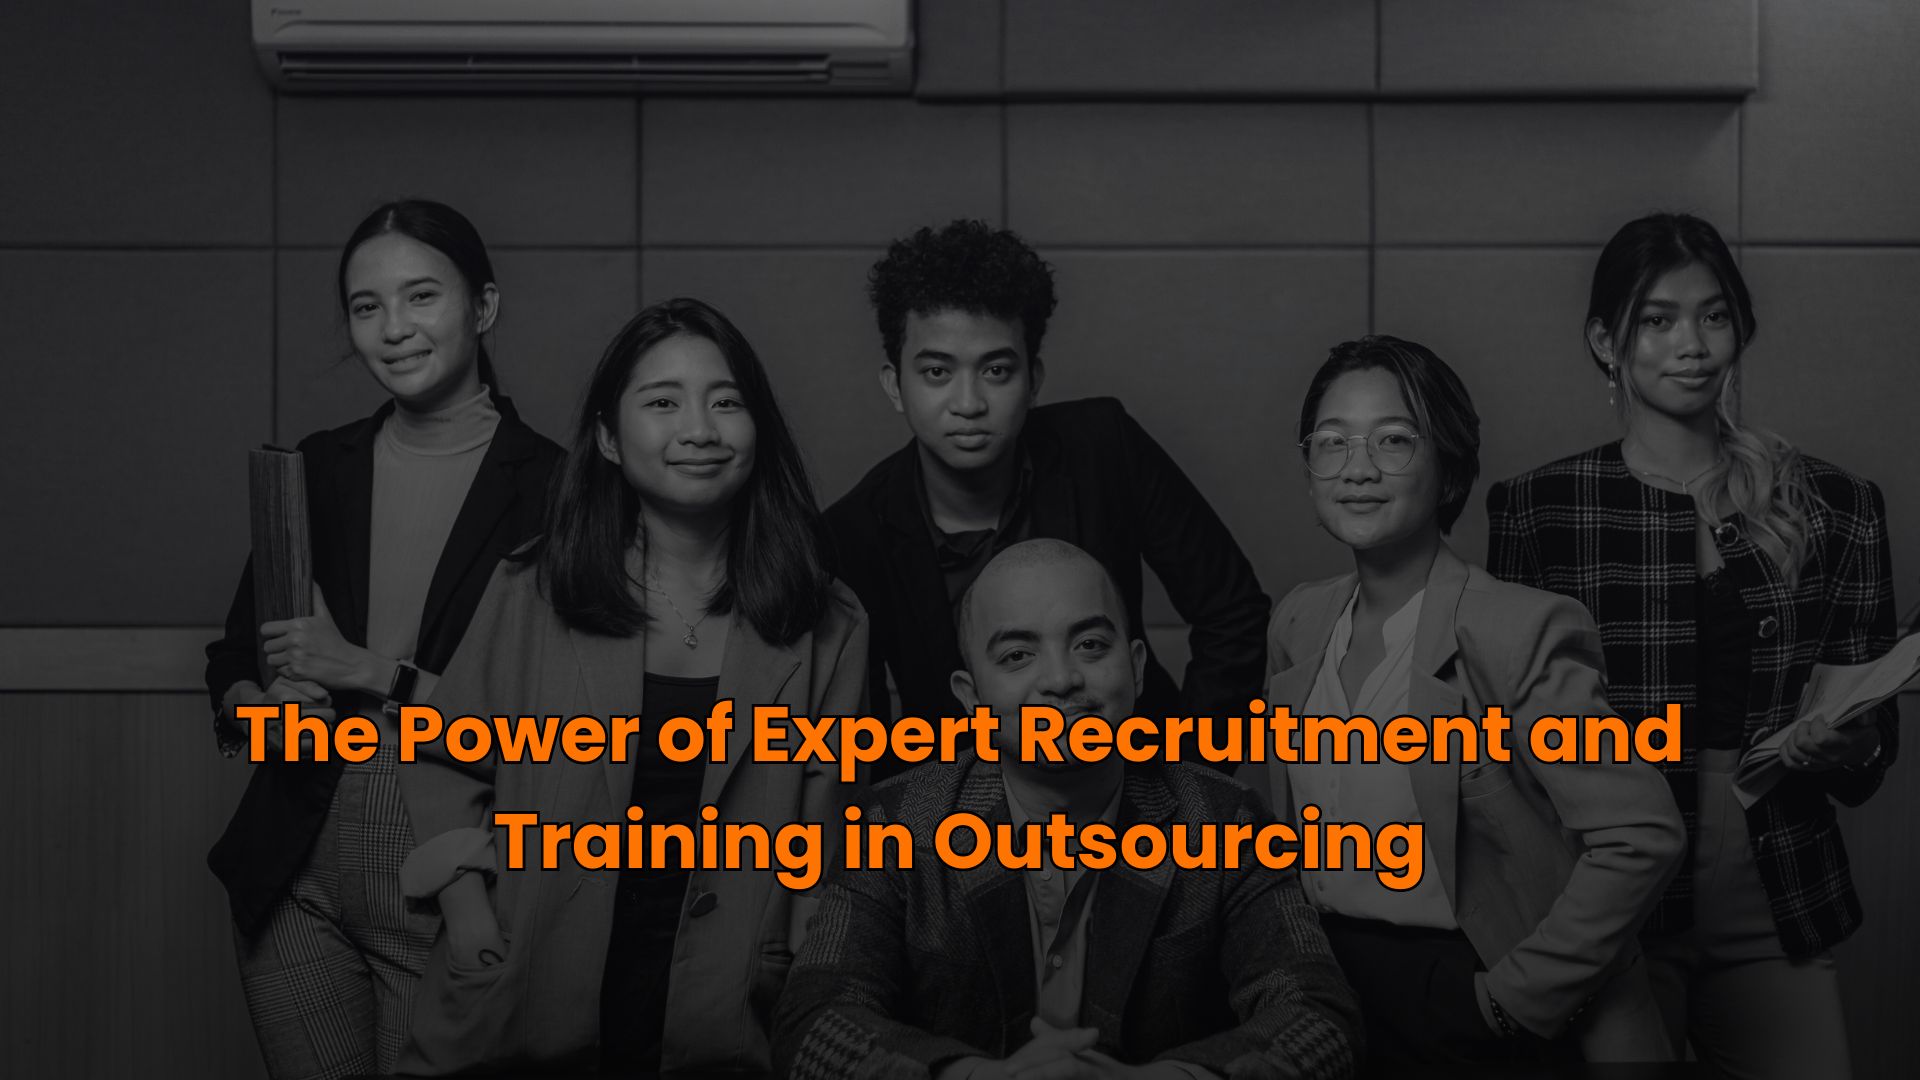 The Power of Expert Recruitment and Training in Outsourcing